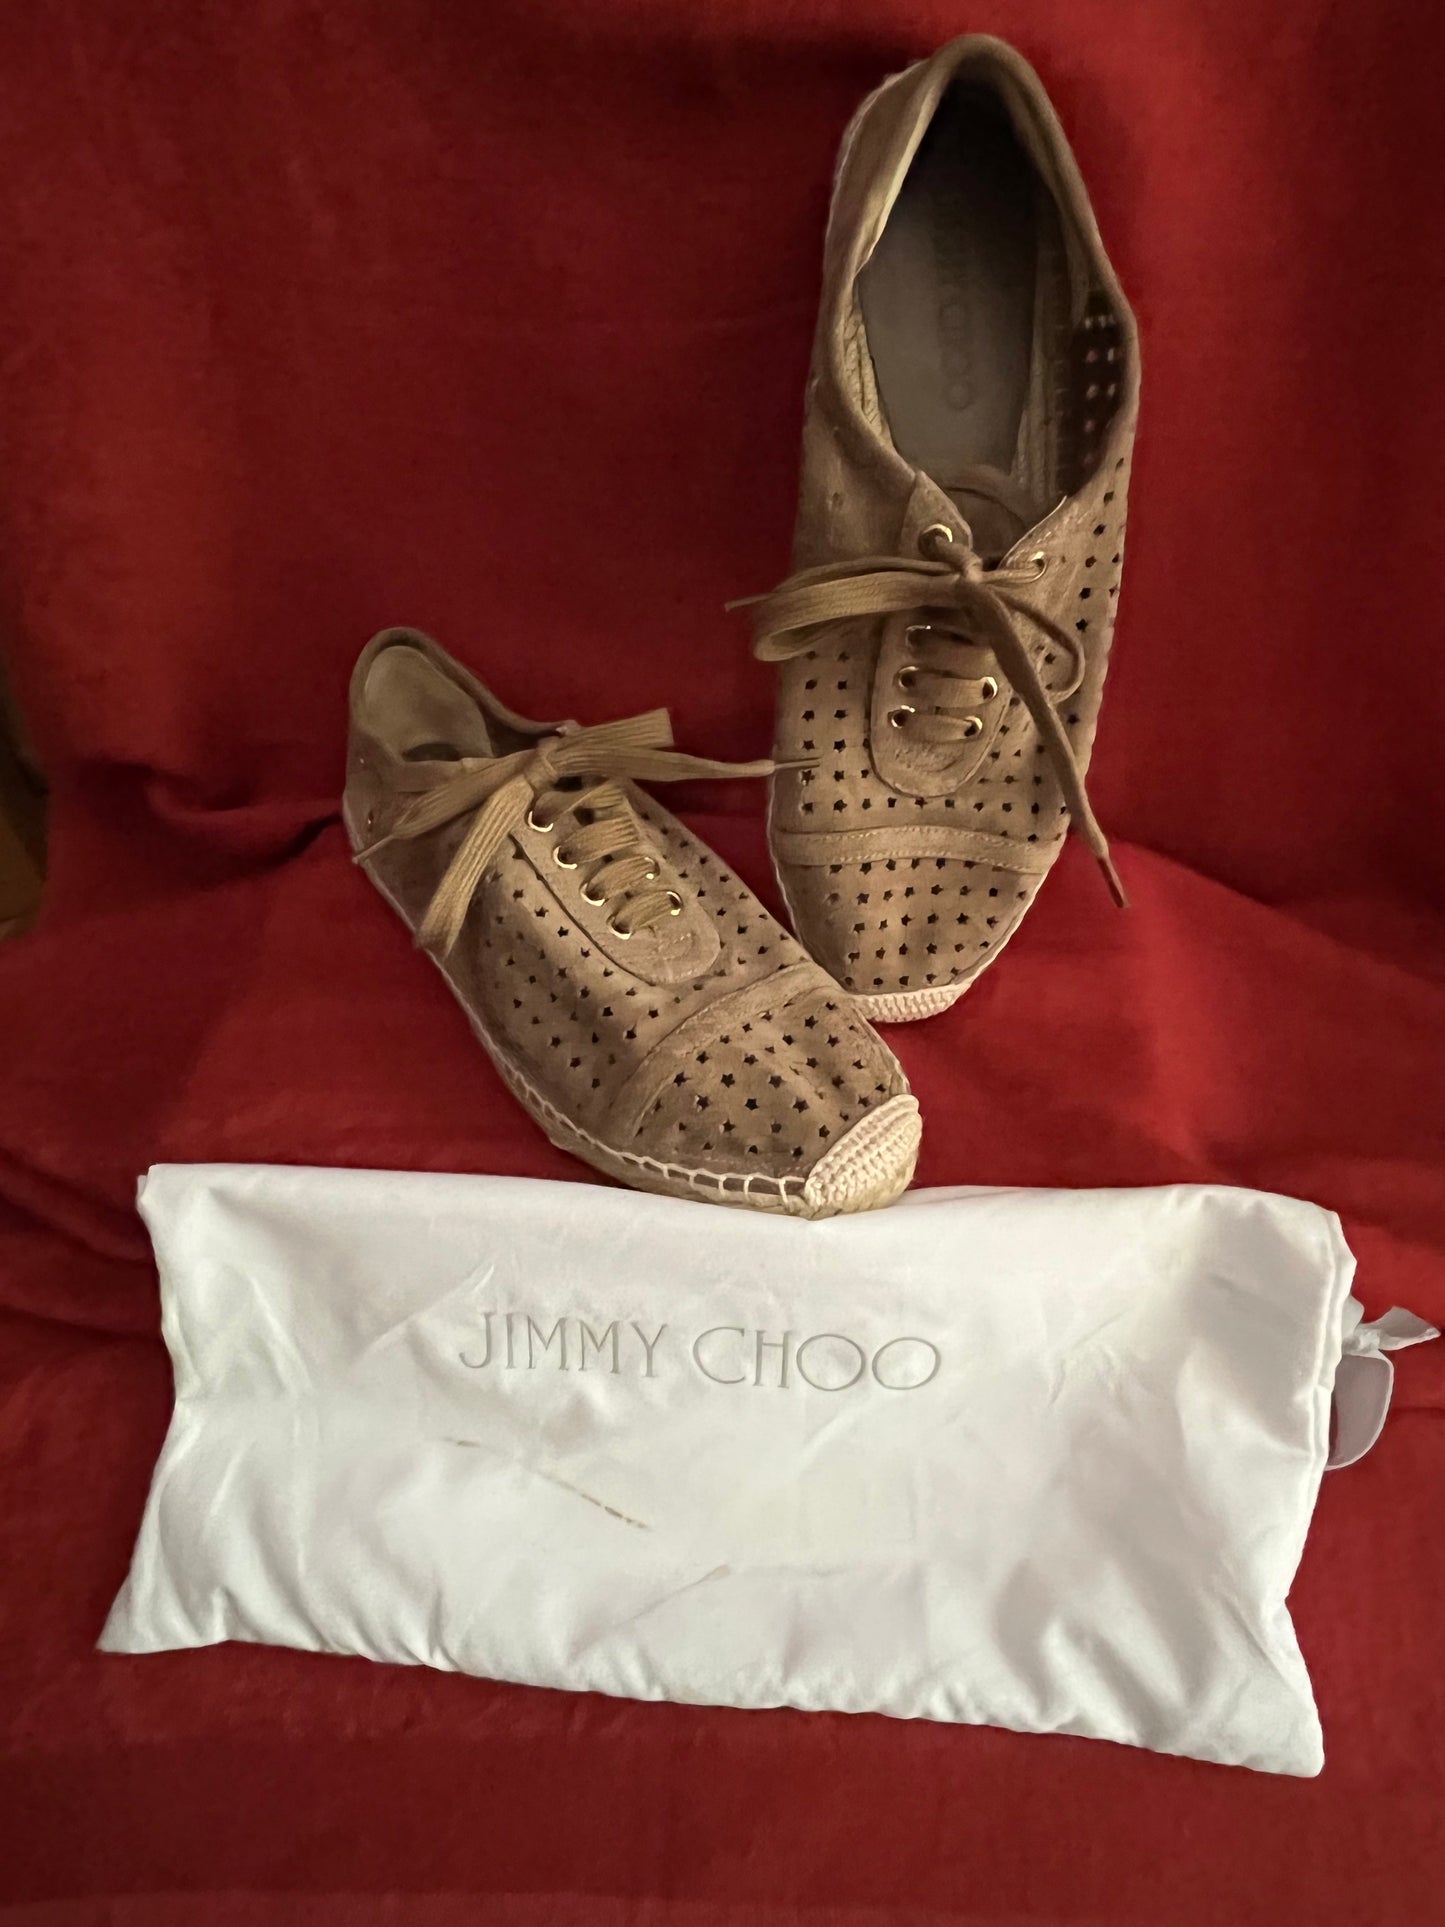 Jimmy Choo Suede Tie Espadrilles Made in Spain-Size 8 (No Box)